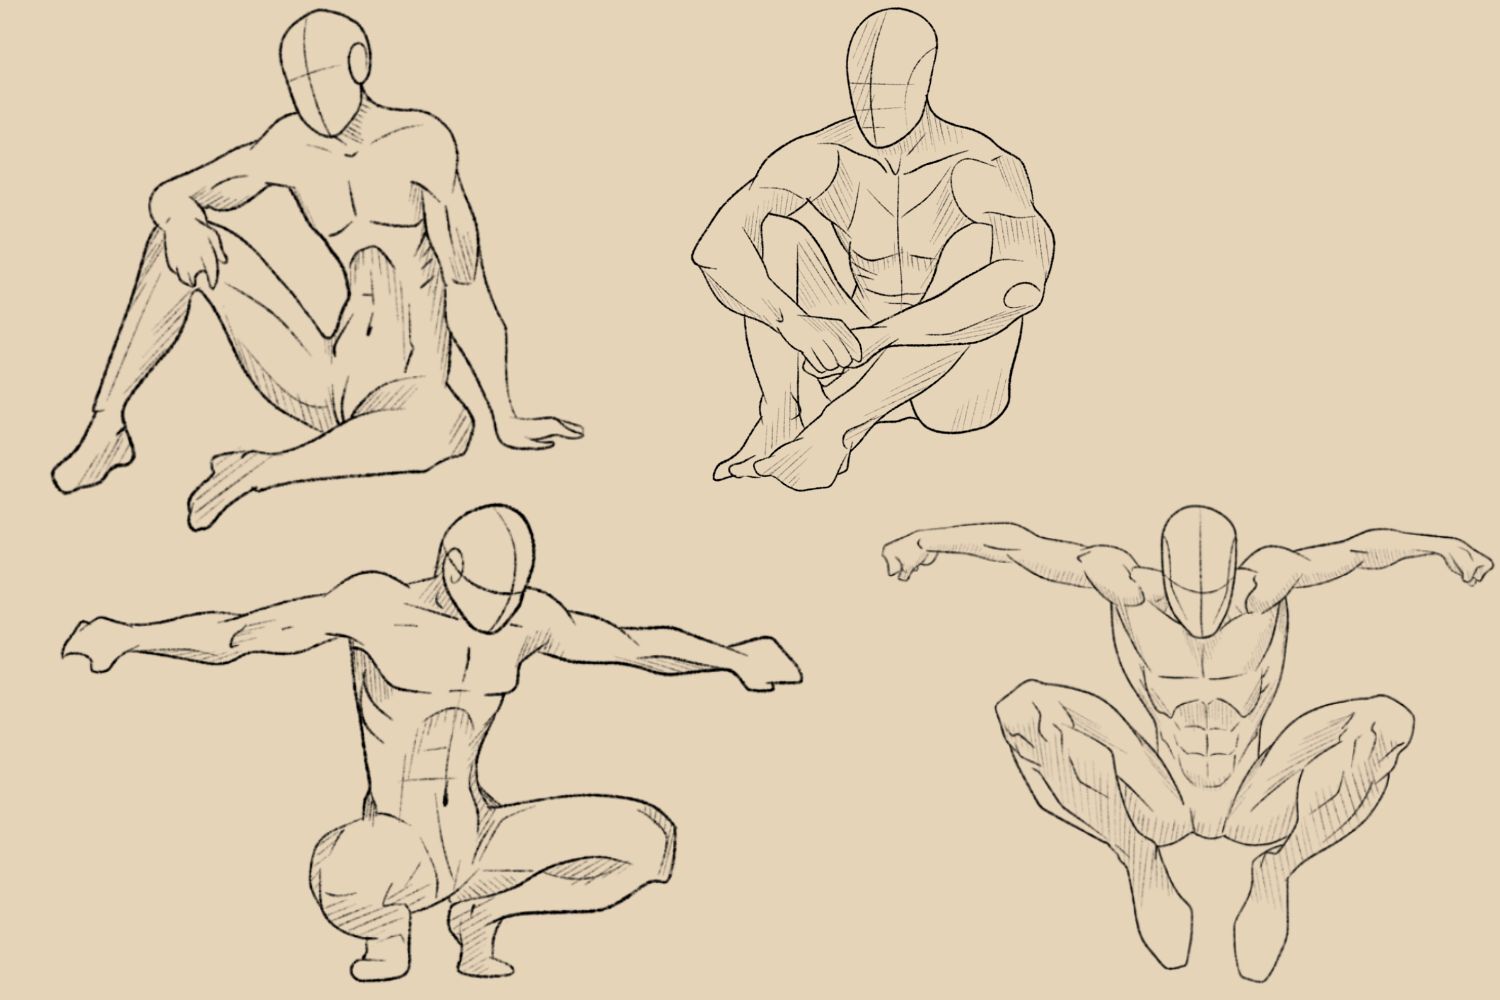 how to draw manga body: male body proportions|drawing tutorial - YouTube